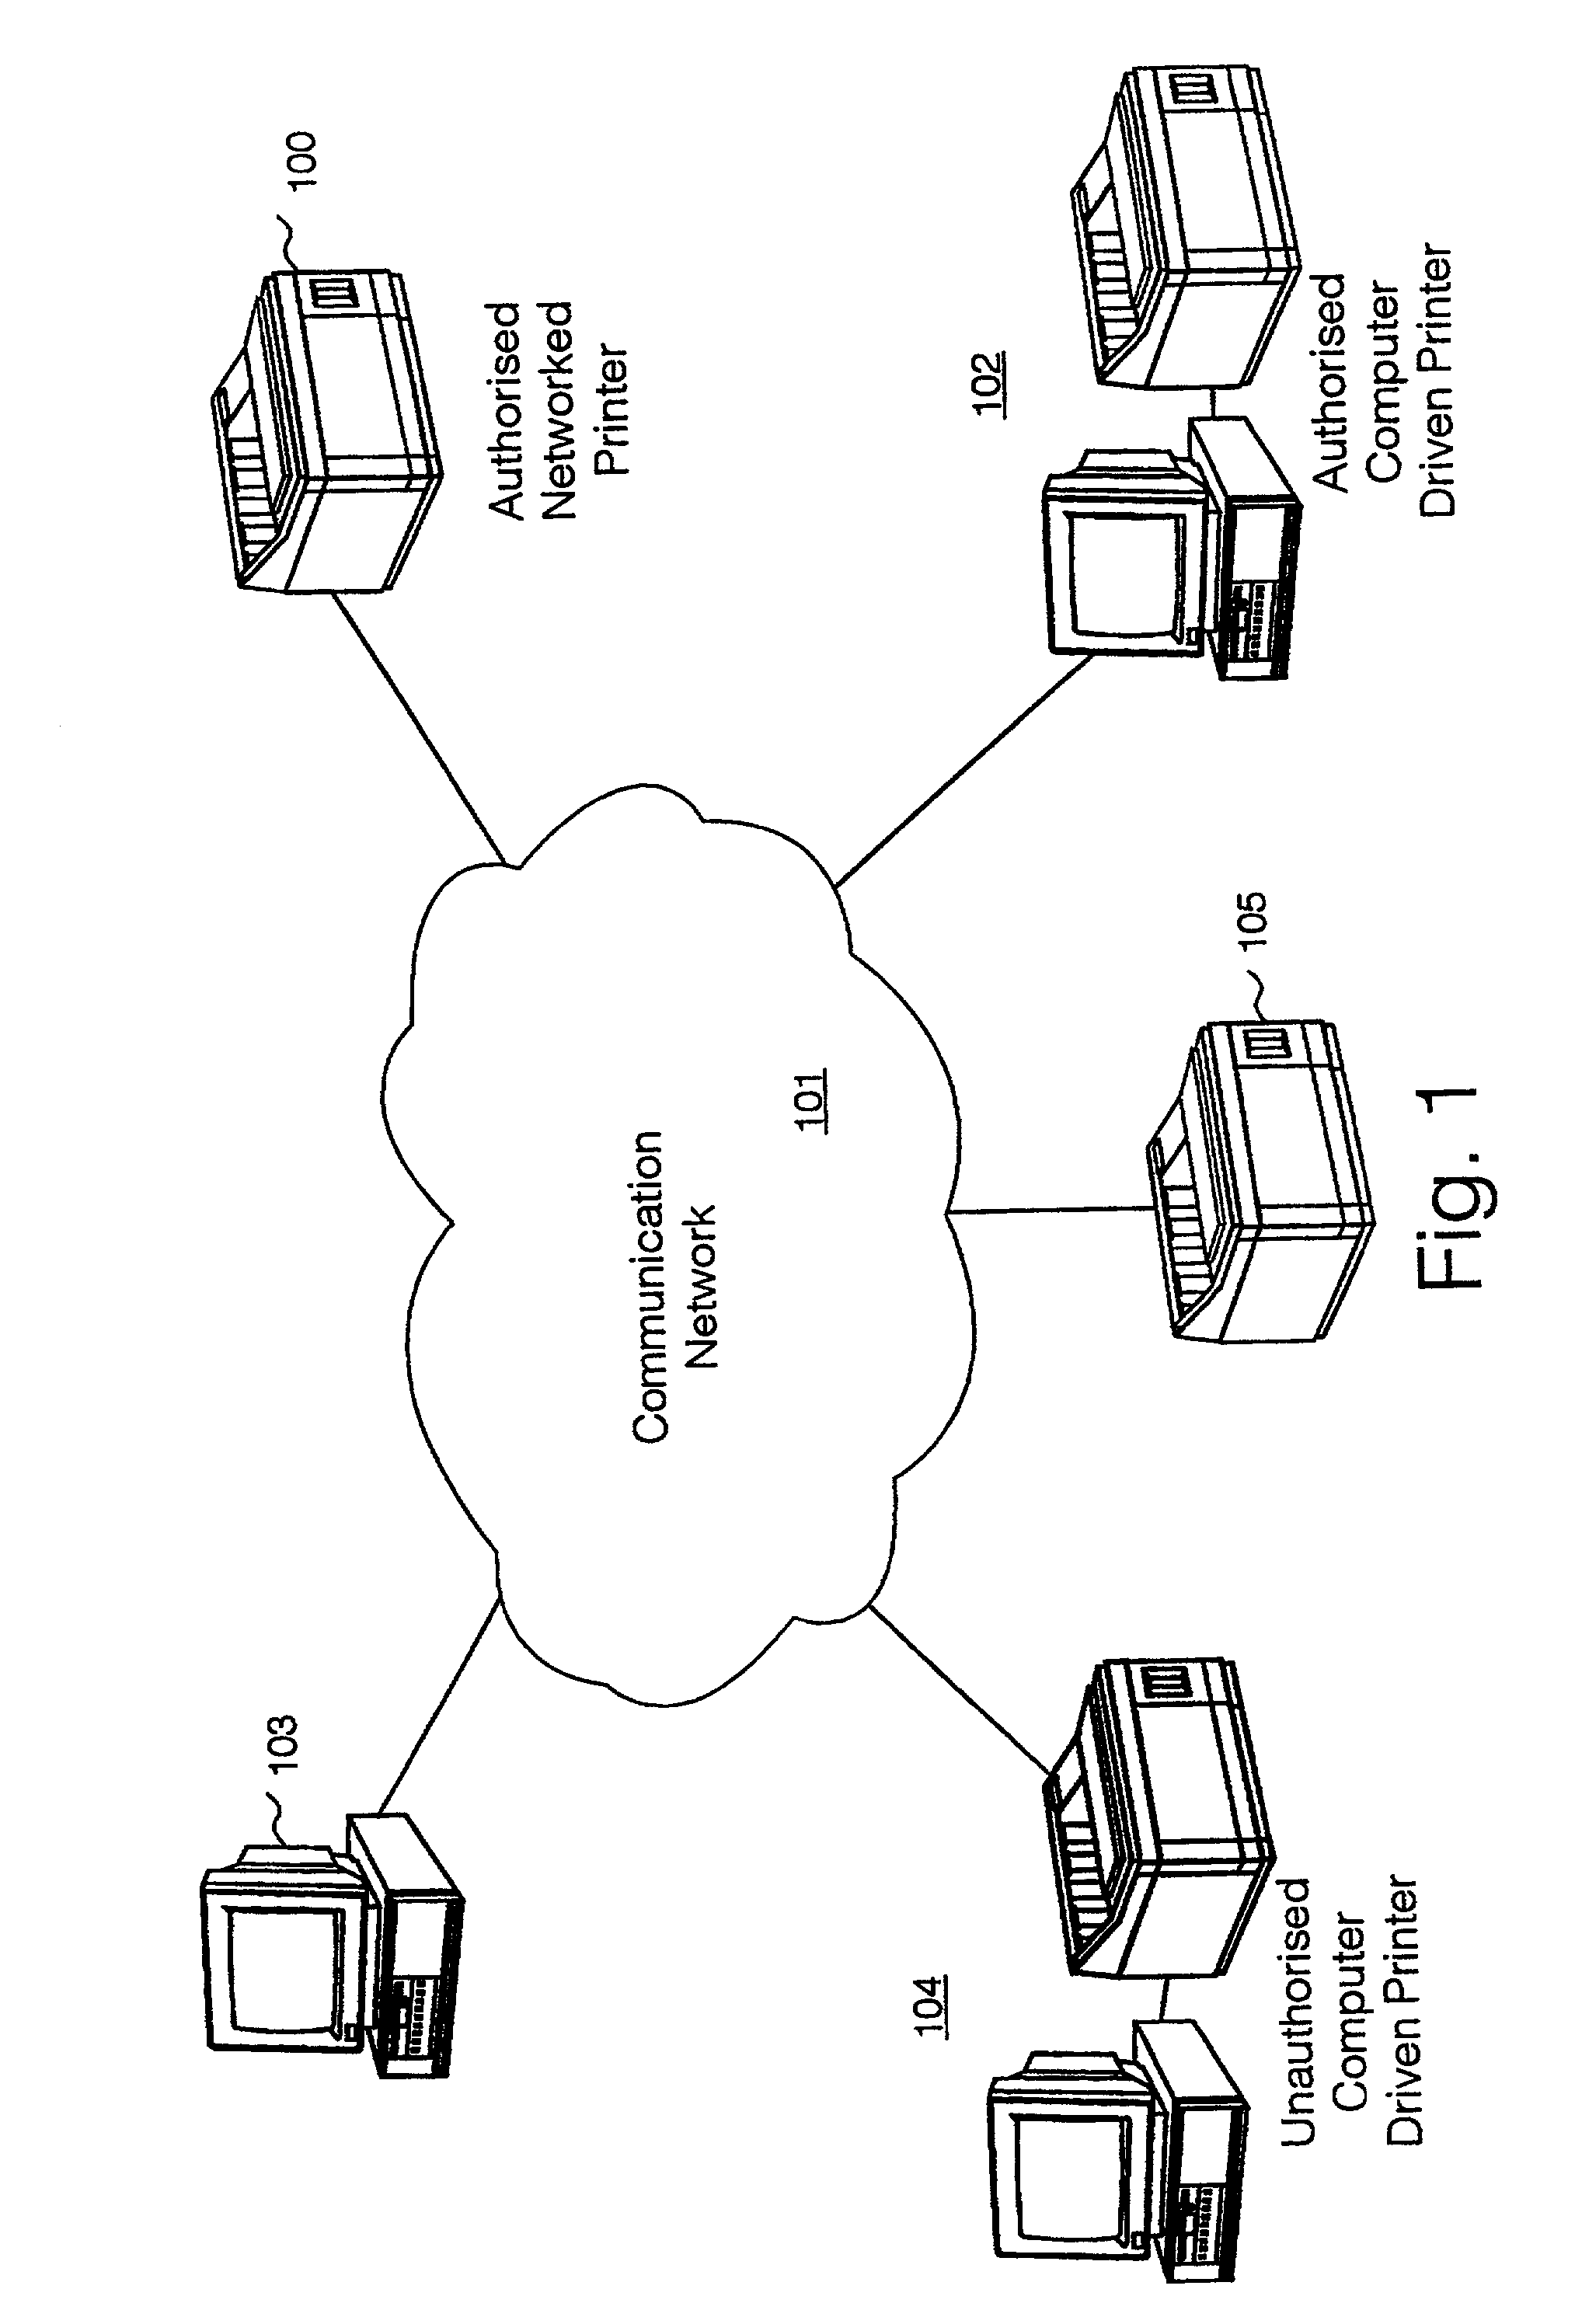 Mechanism for controlling if/when material can be printed on a specific printer